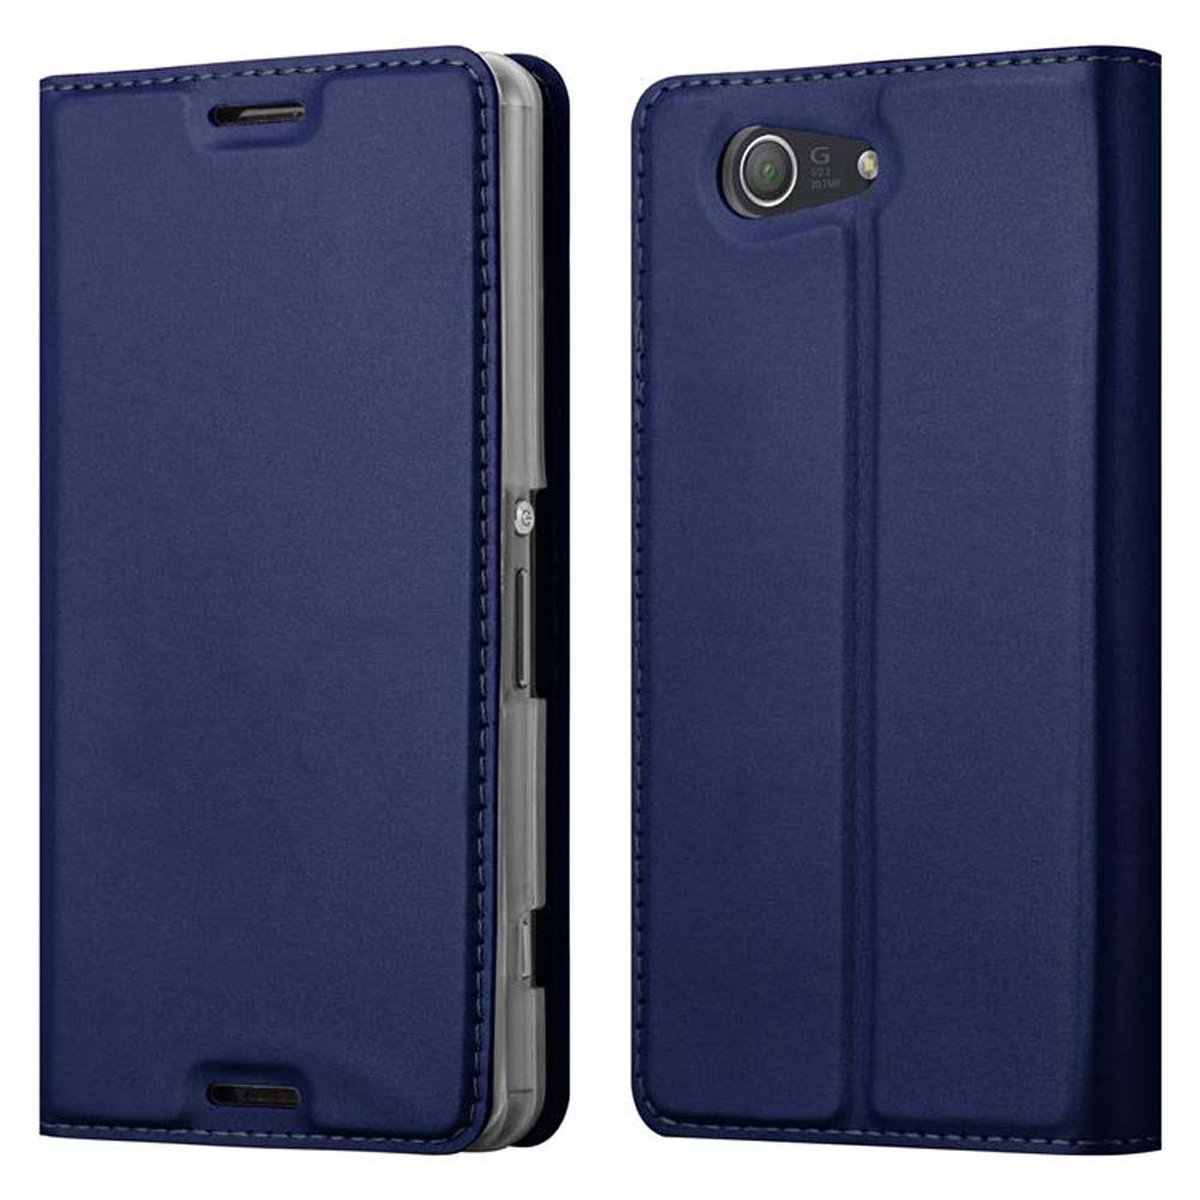 CADORABO Handyhülle Classy Book Style, Z3 Bookcover, Sony, BLAU CLASSY Xperia COMPACT, DUNKEL